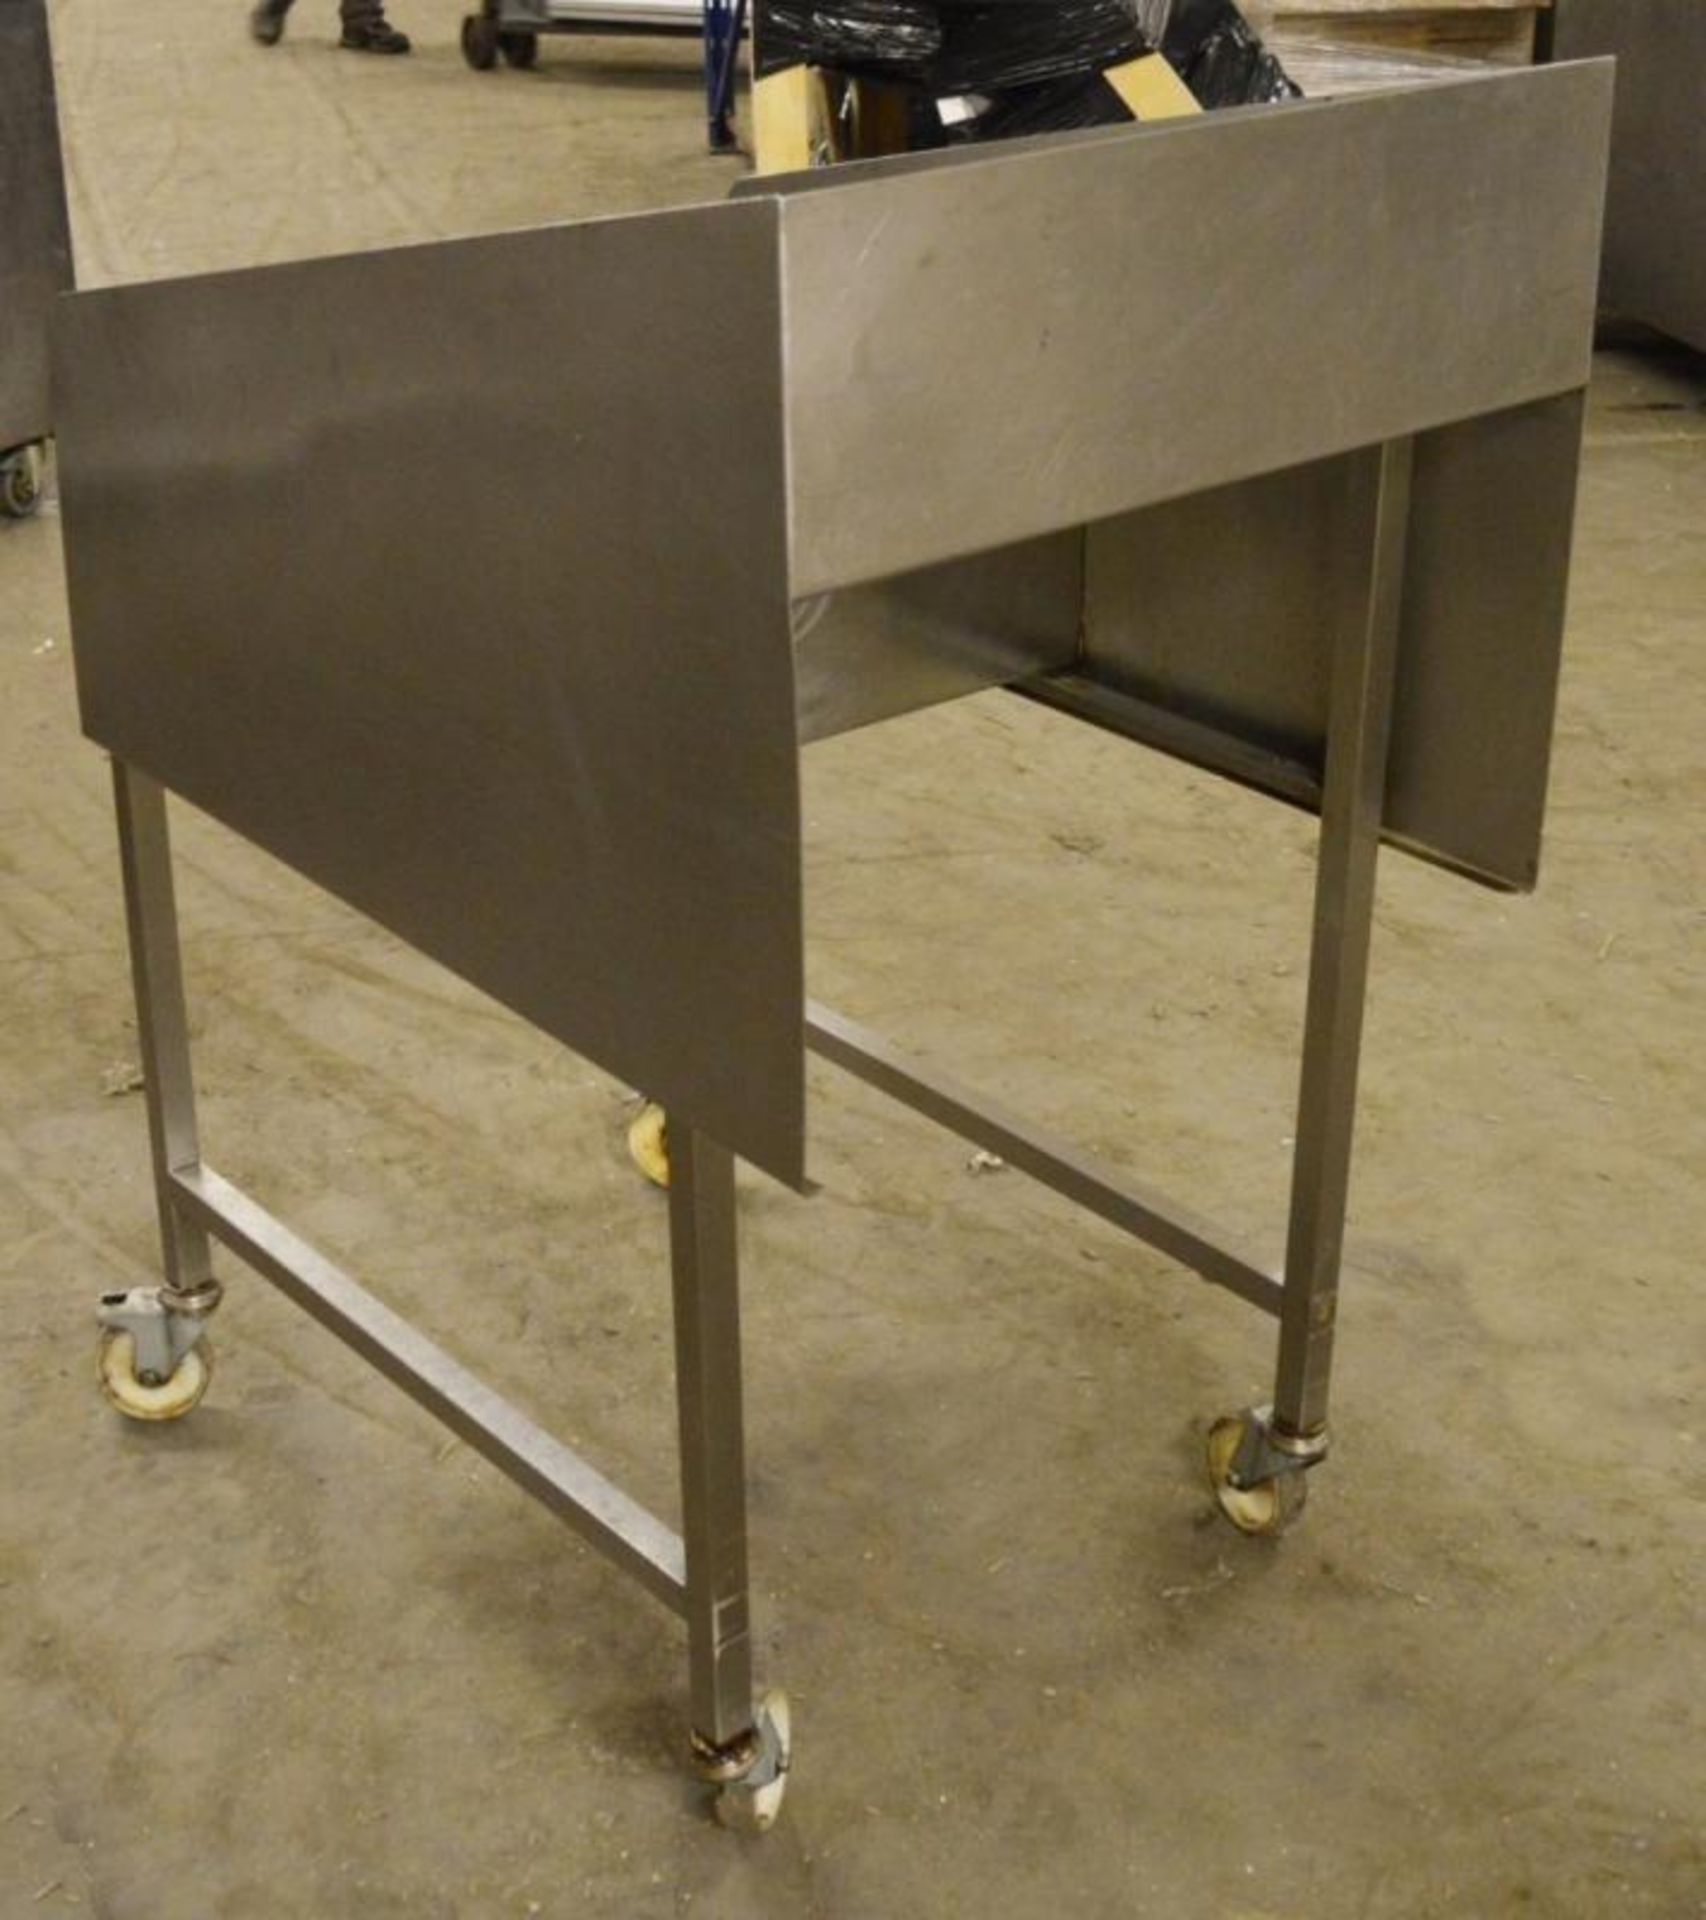 1 x Stainless Steel Commercial Waste Bench - Two Tier Waste Chute on Castors - H114 x W62.5 x D90 cm - Bild 5 aus 5